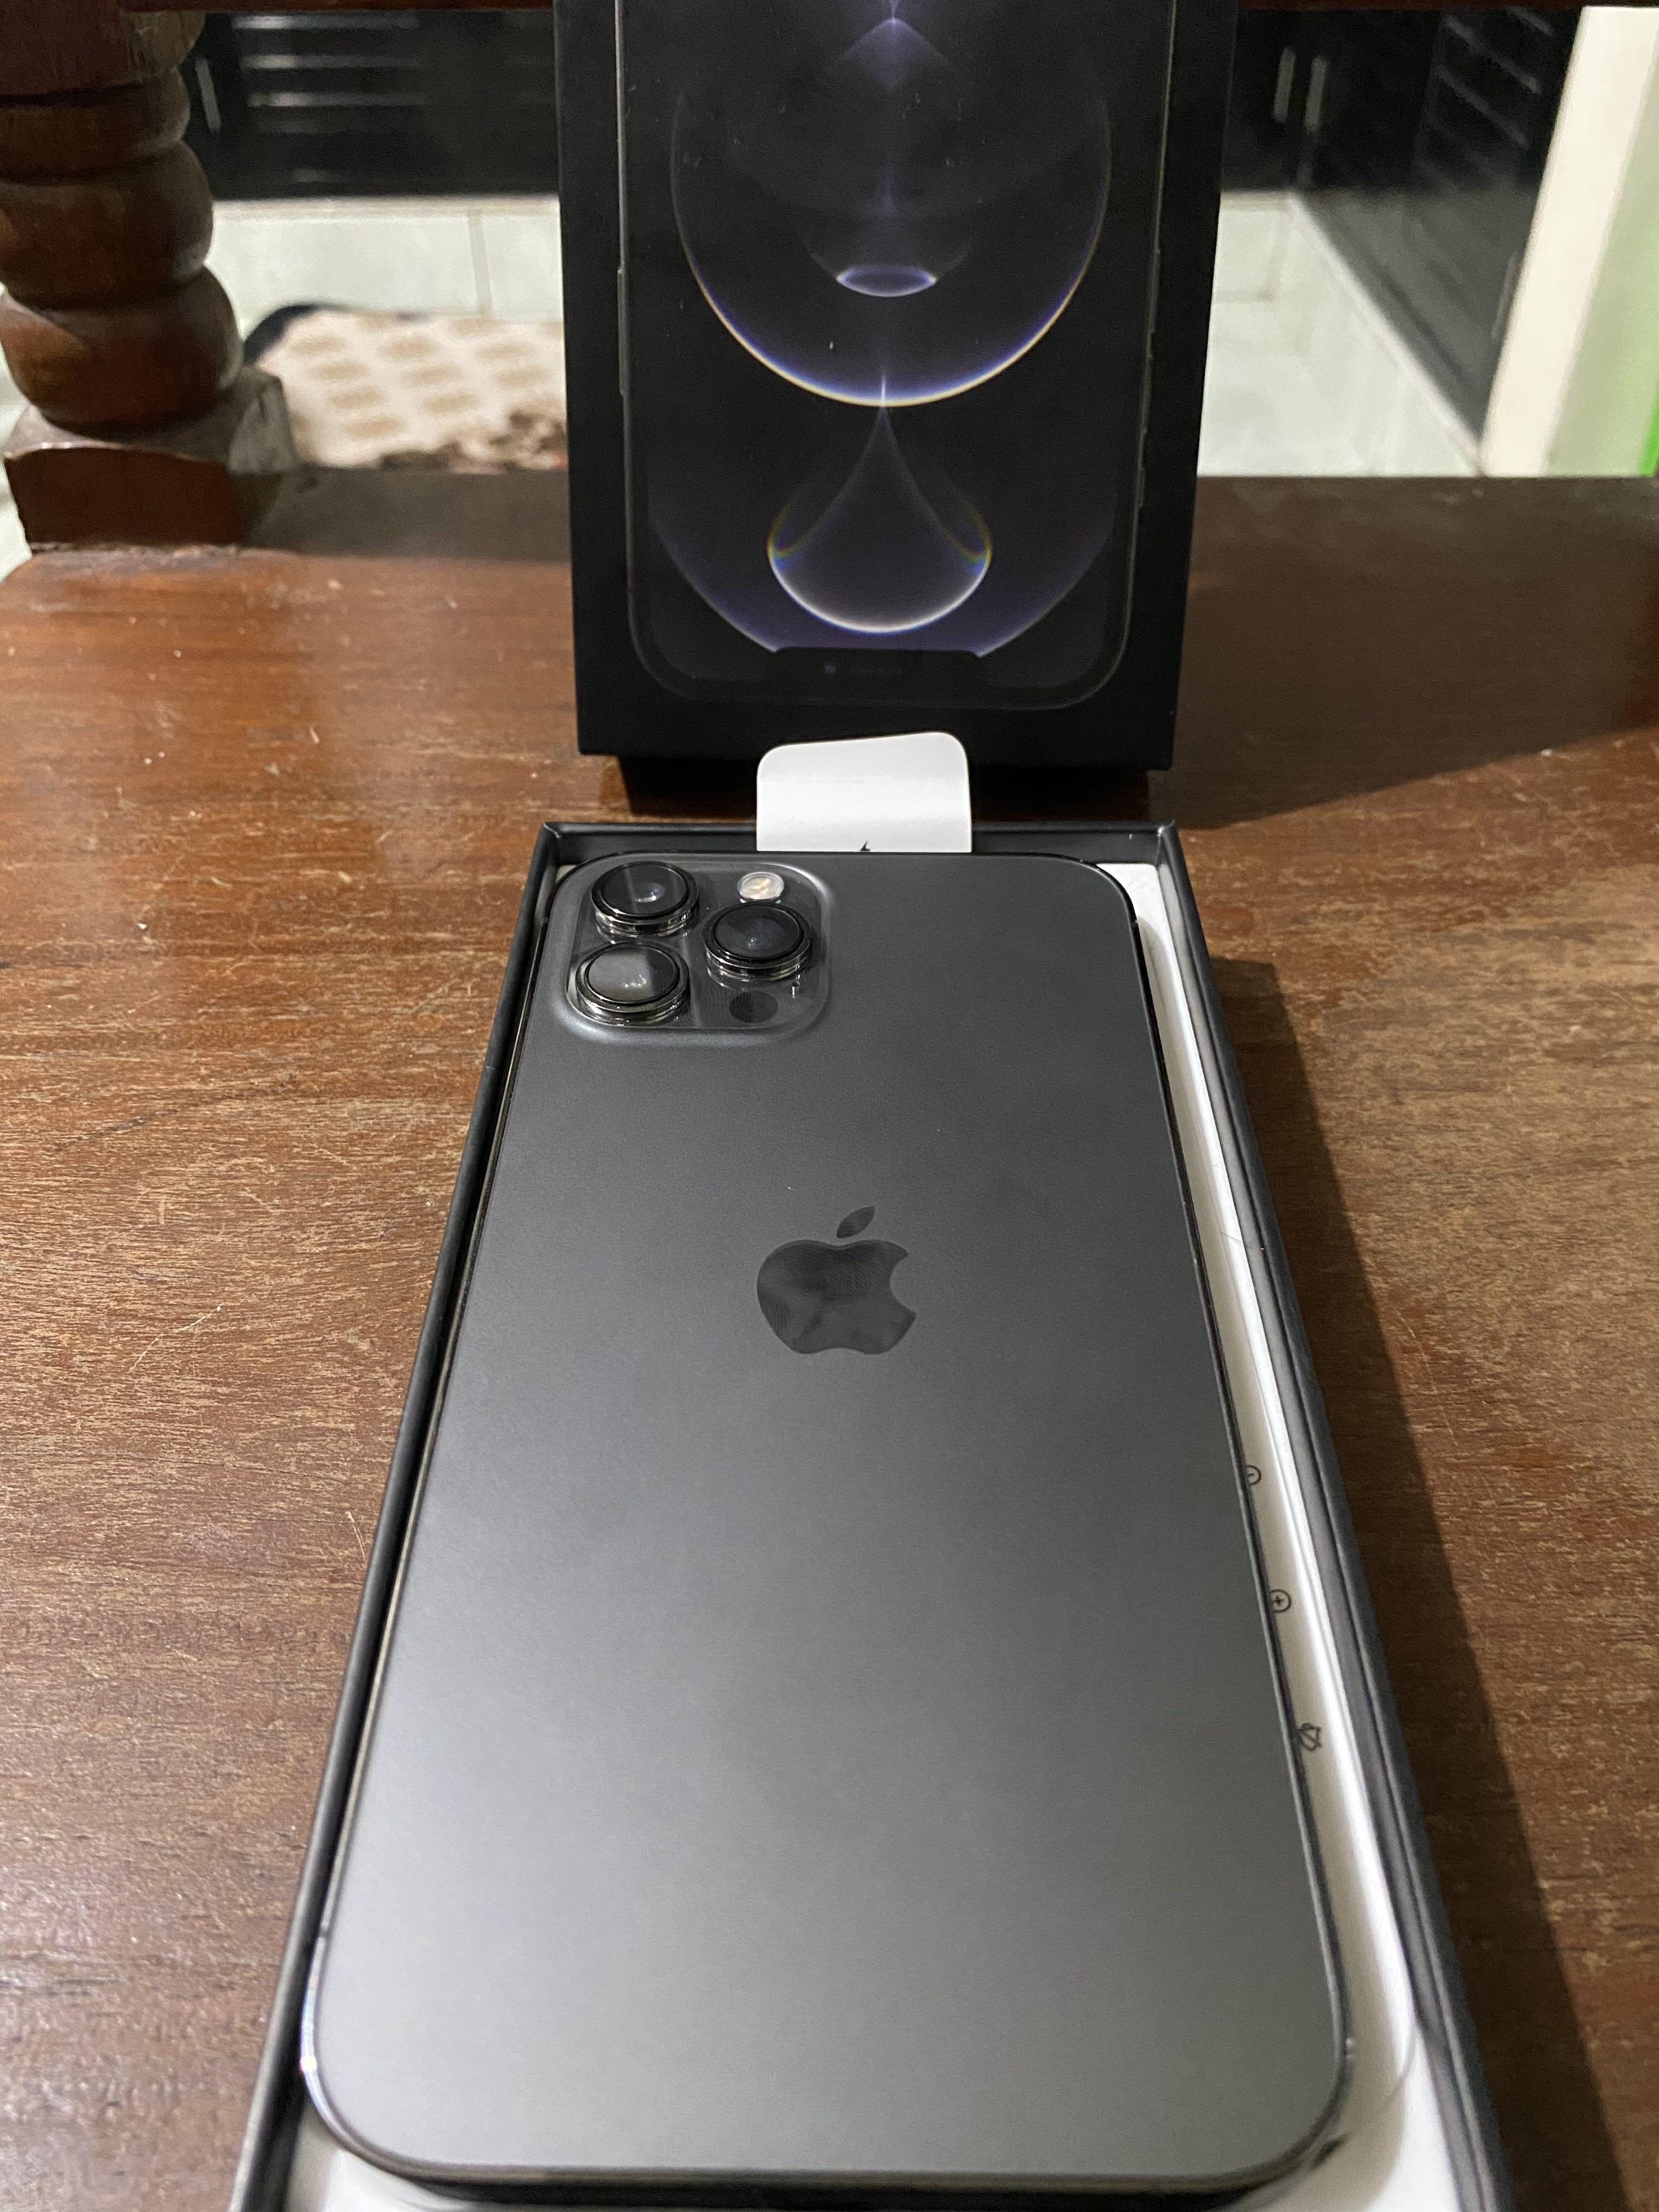 For Sale Iphone 12 Pro Max 128gb Color Black Almost New 4 Days Old For Sale Mobile Phones Gadgets Mobile Phones Iphone Iphone 12 Series On Carousell